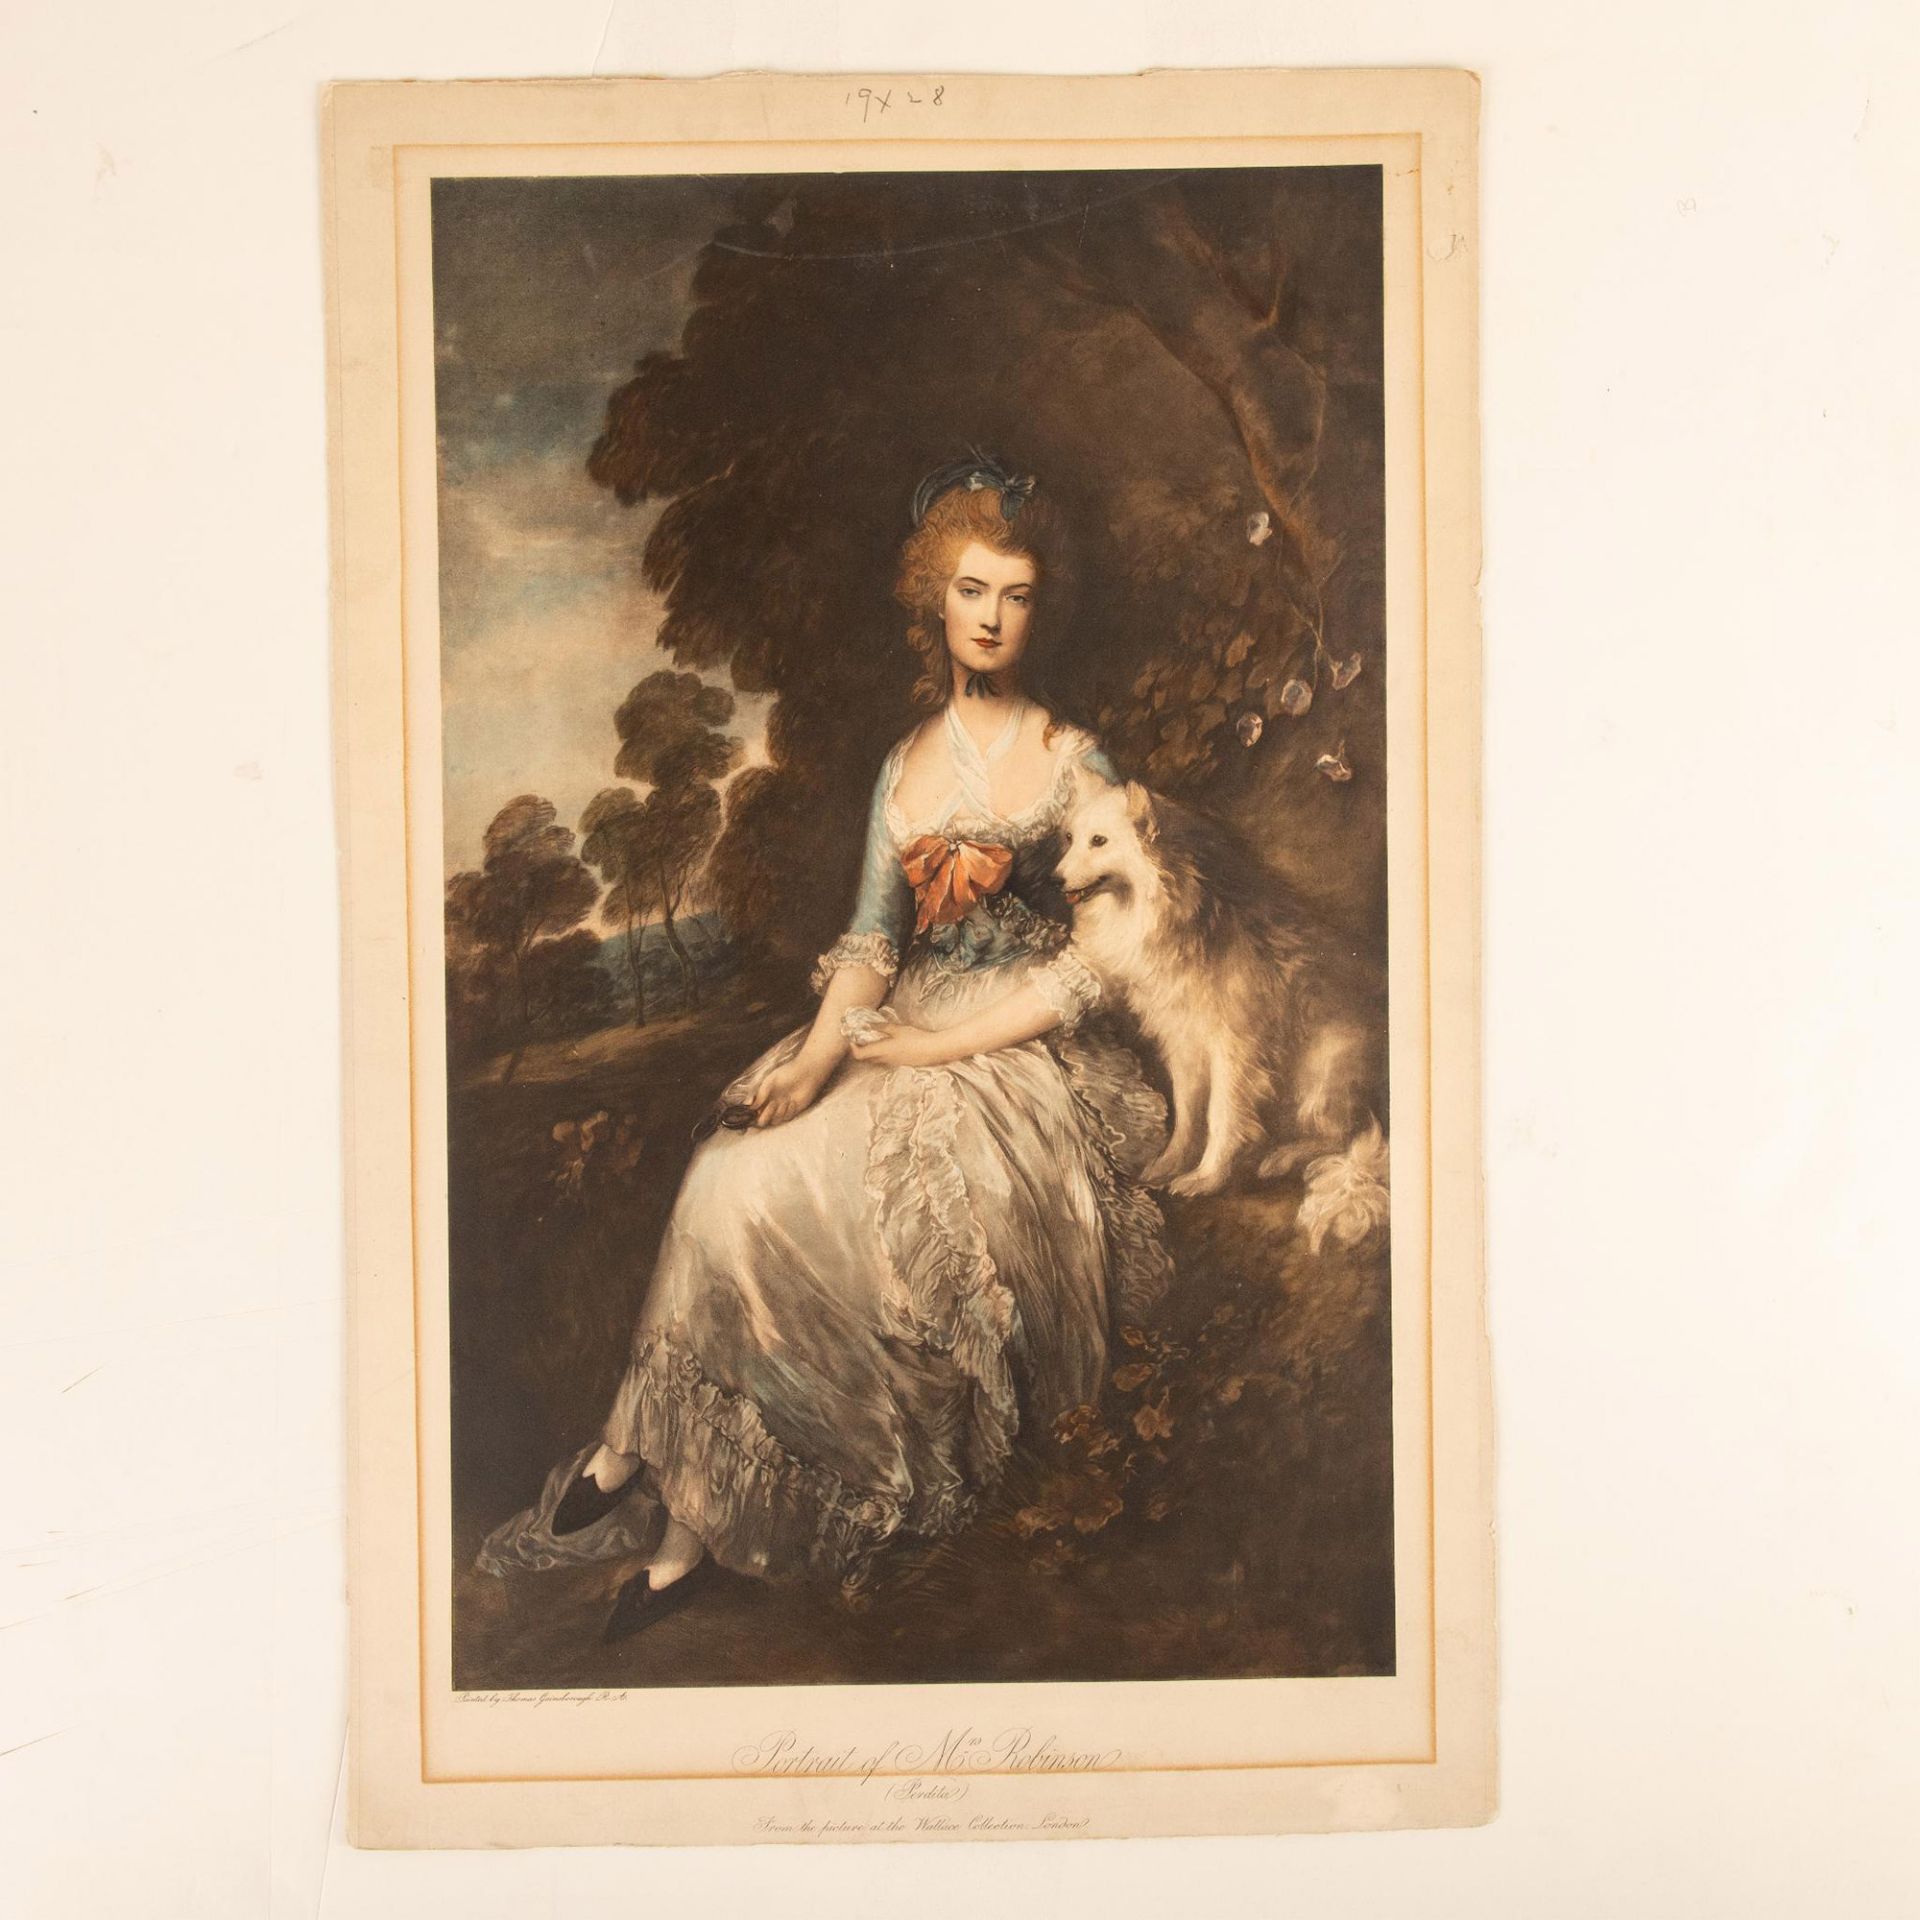 Gainsborough (Aft.) Antique Hand-Colored Lithograph, Mrs. Robinson